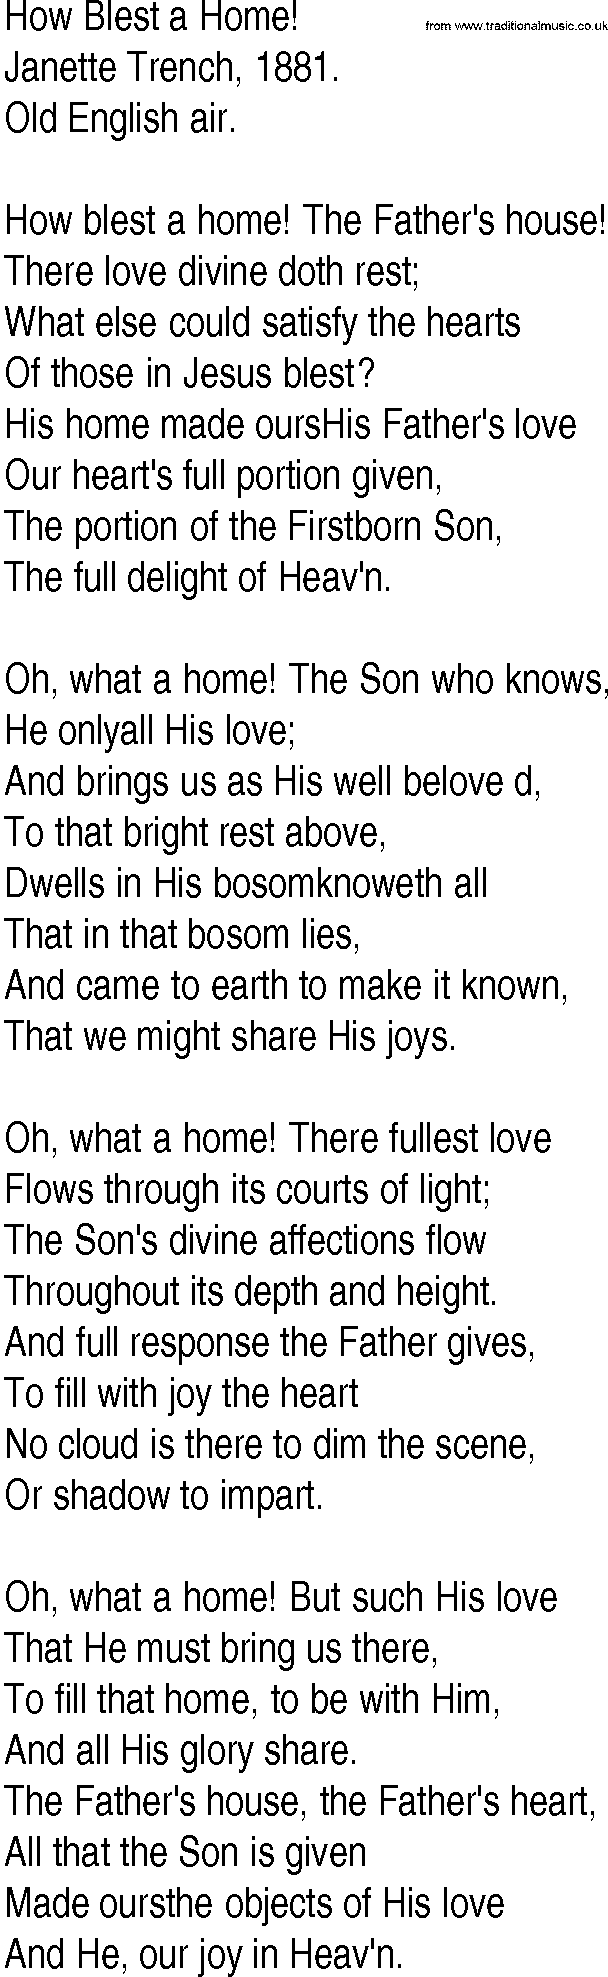 Hymn and Gospel Song: How Blest a Home! by Janette Trench lyrics